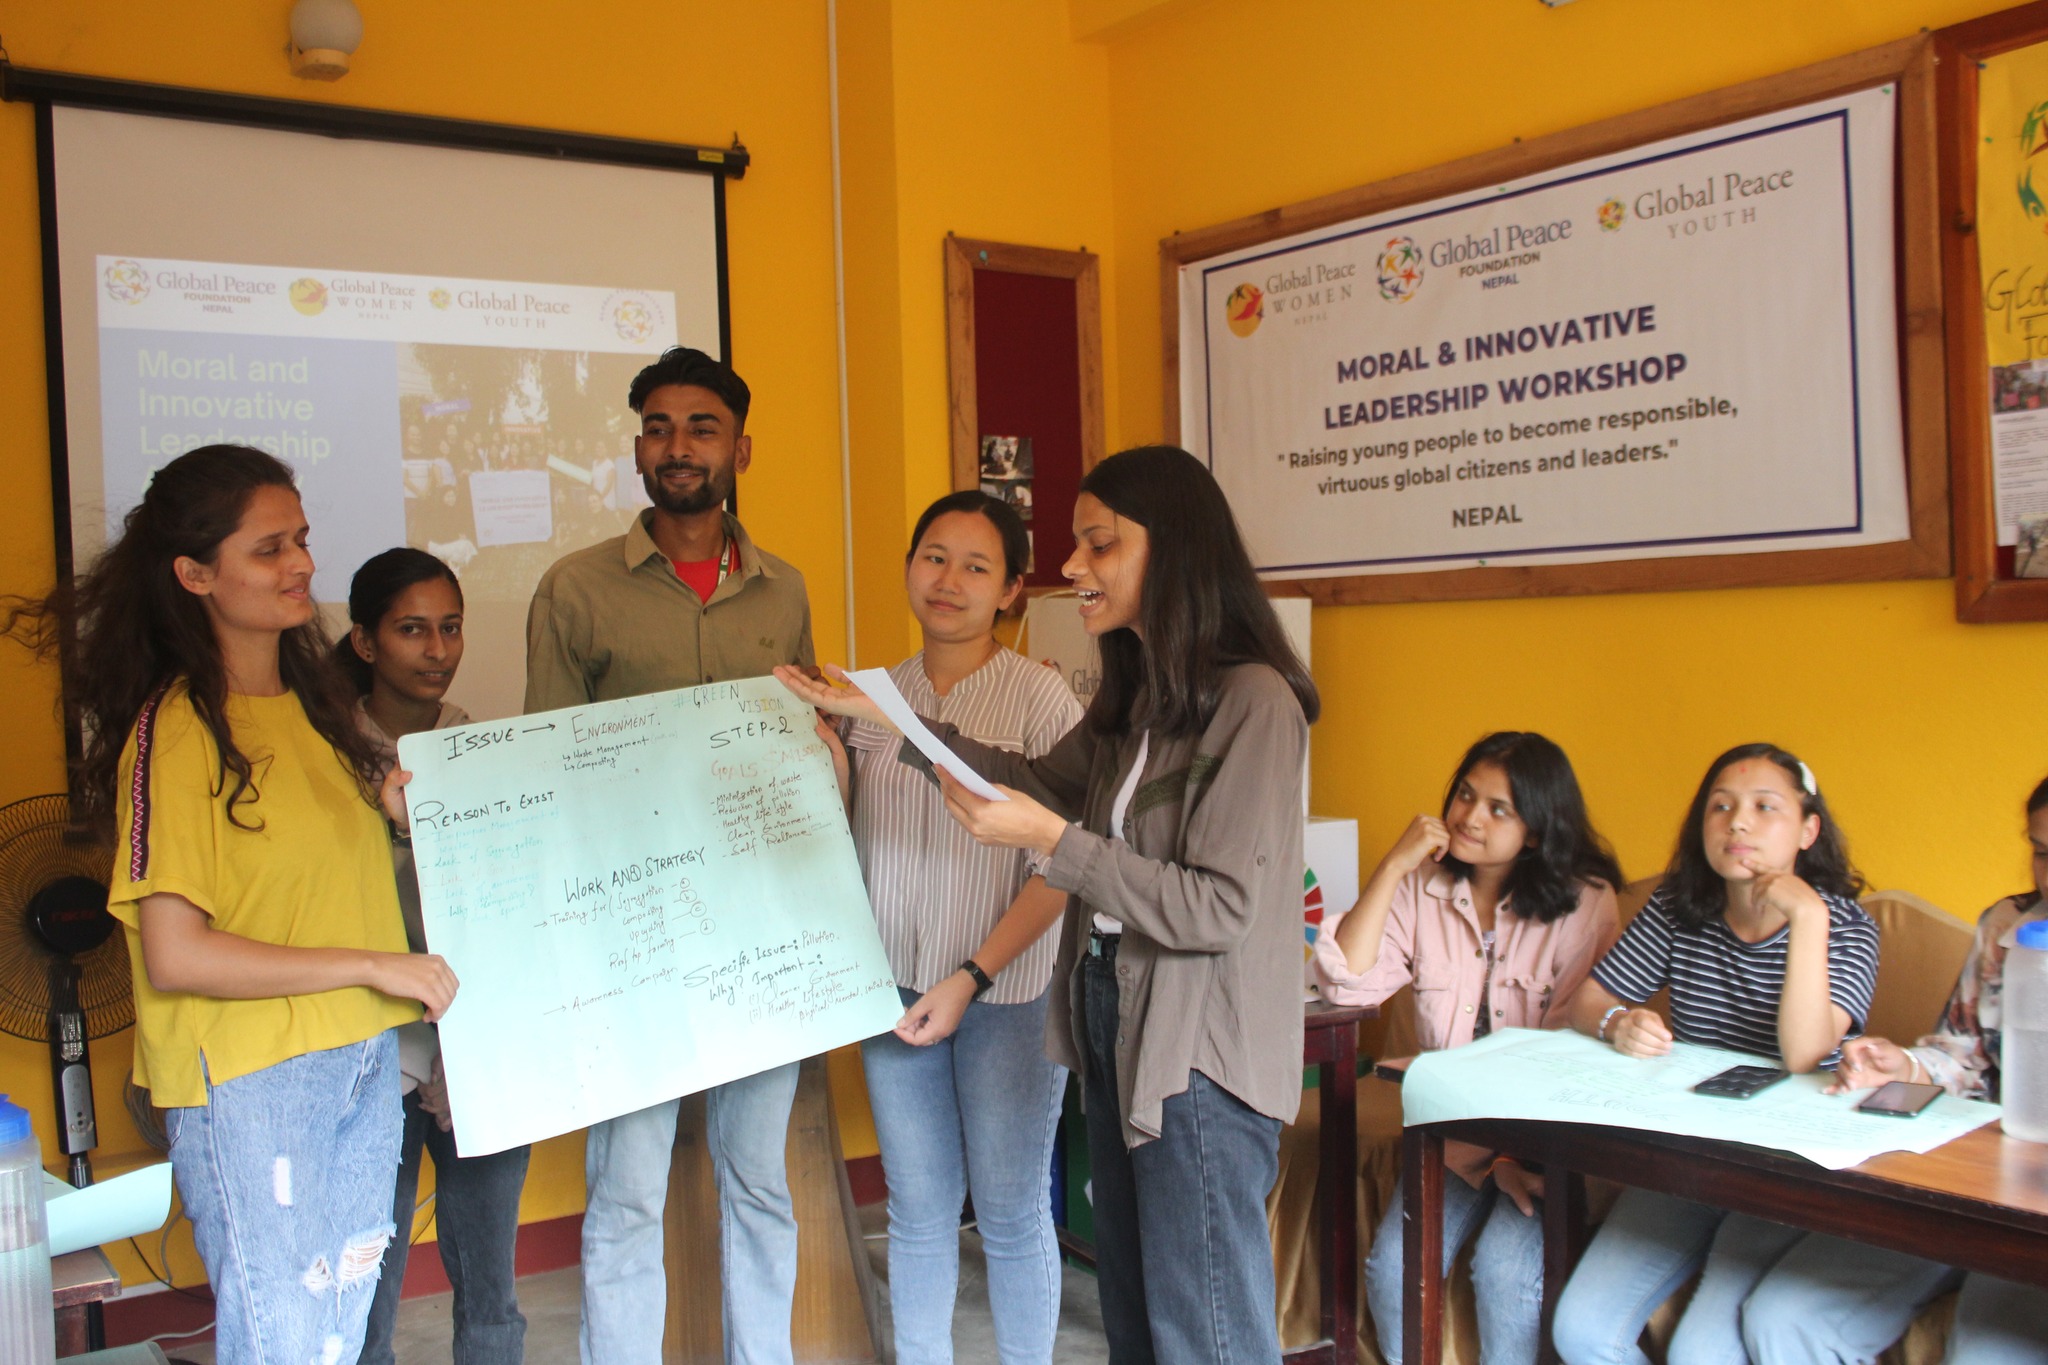 Global Peace Foundation | Moral and Innovative Leadership Workshop Series Gathers Youth in Nepal